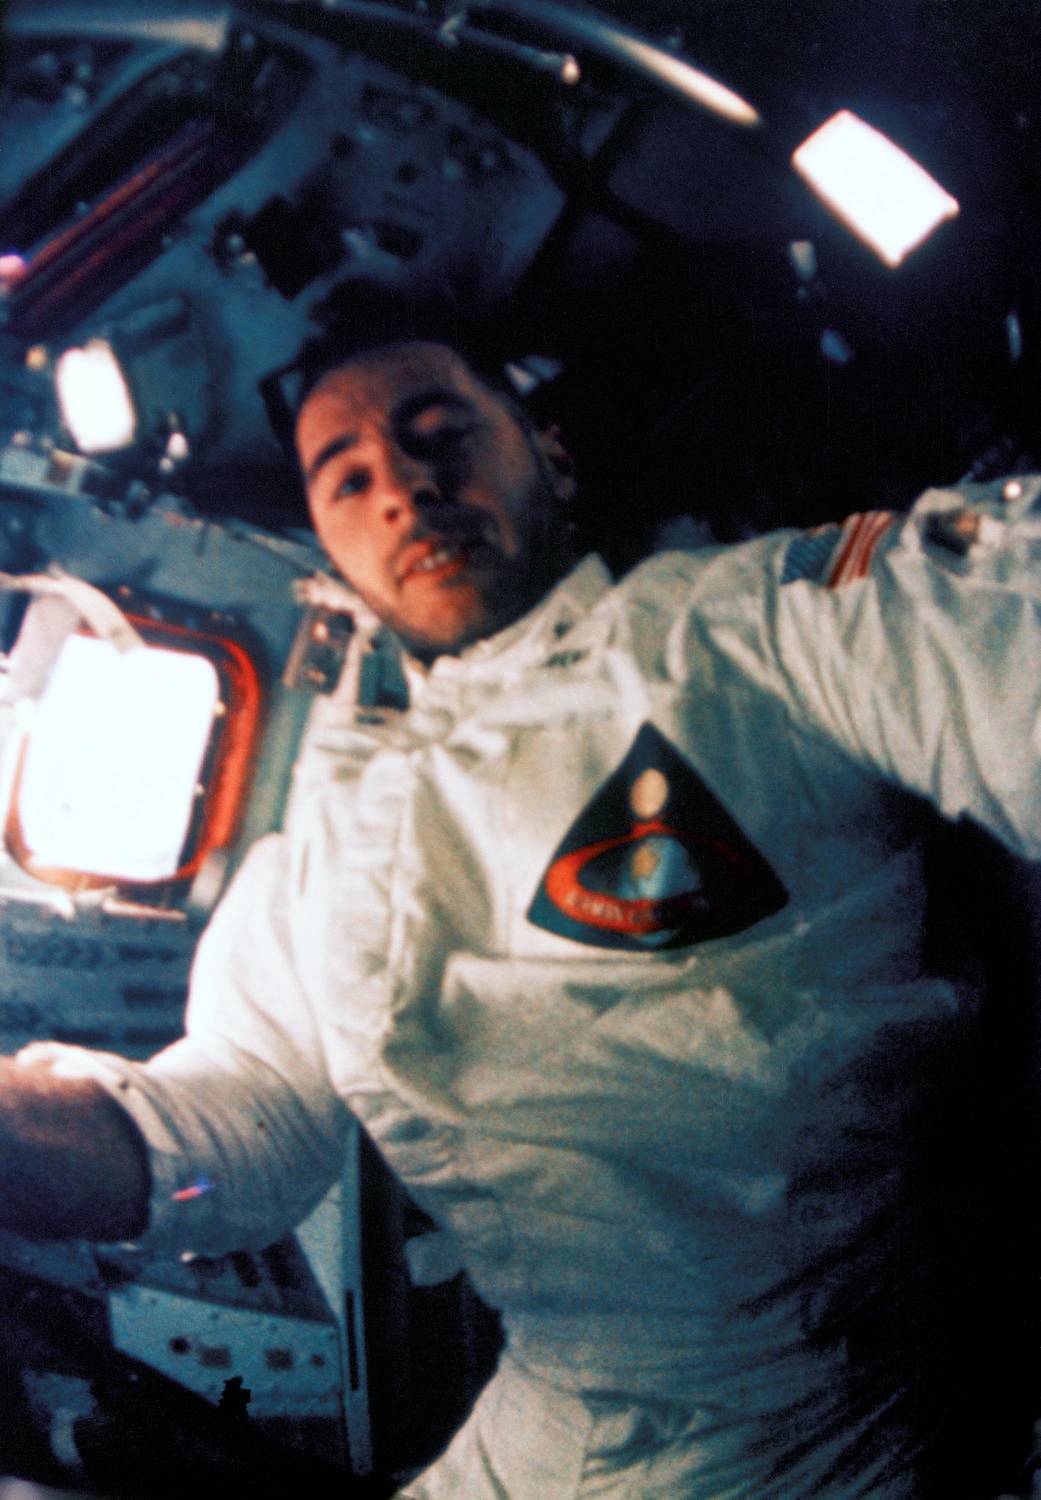 Astronaut inside lunar module without helmet during Apollo 8 mission